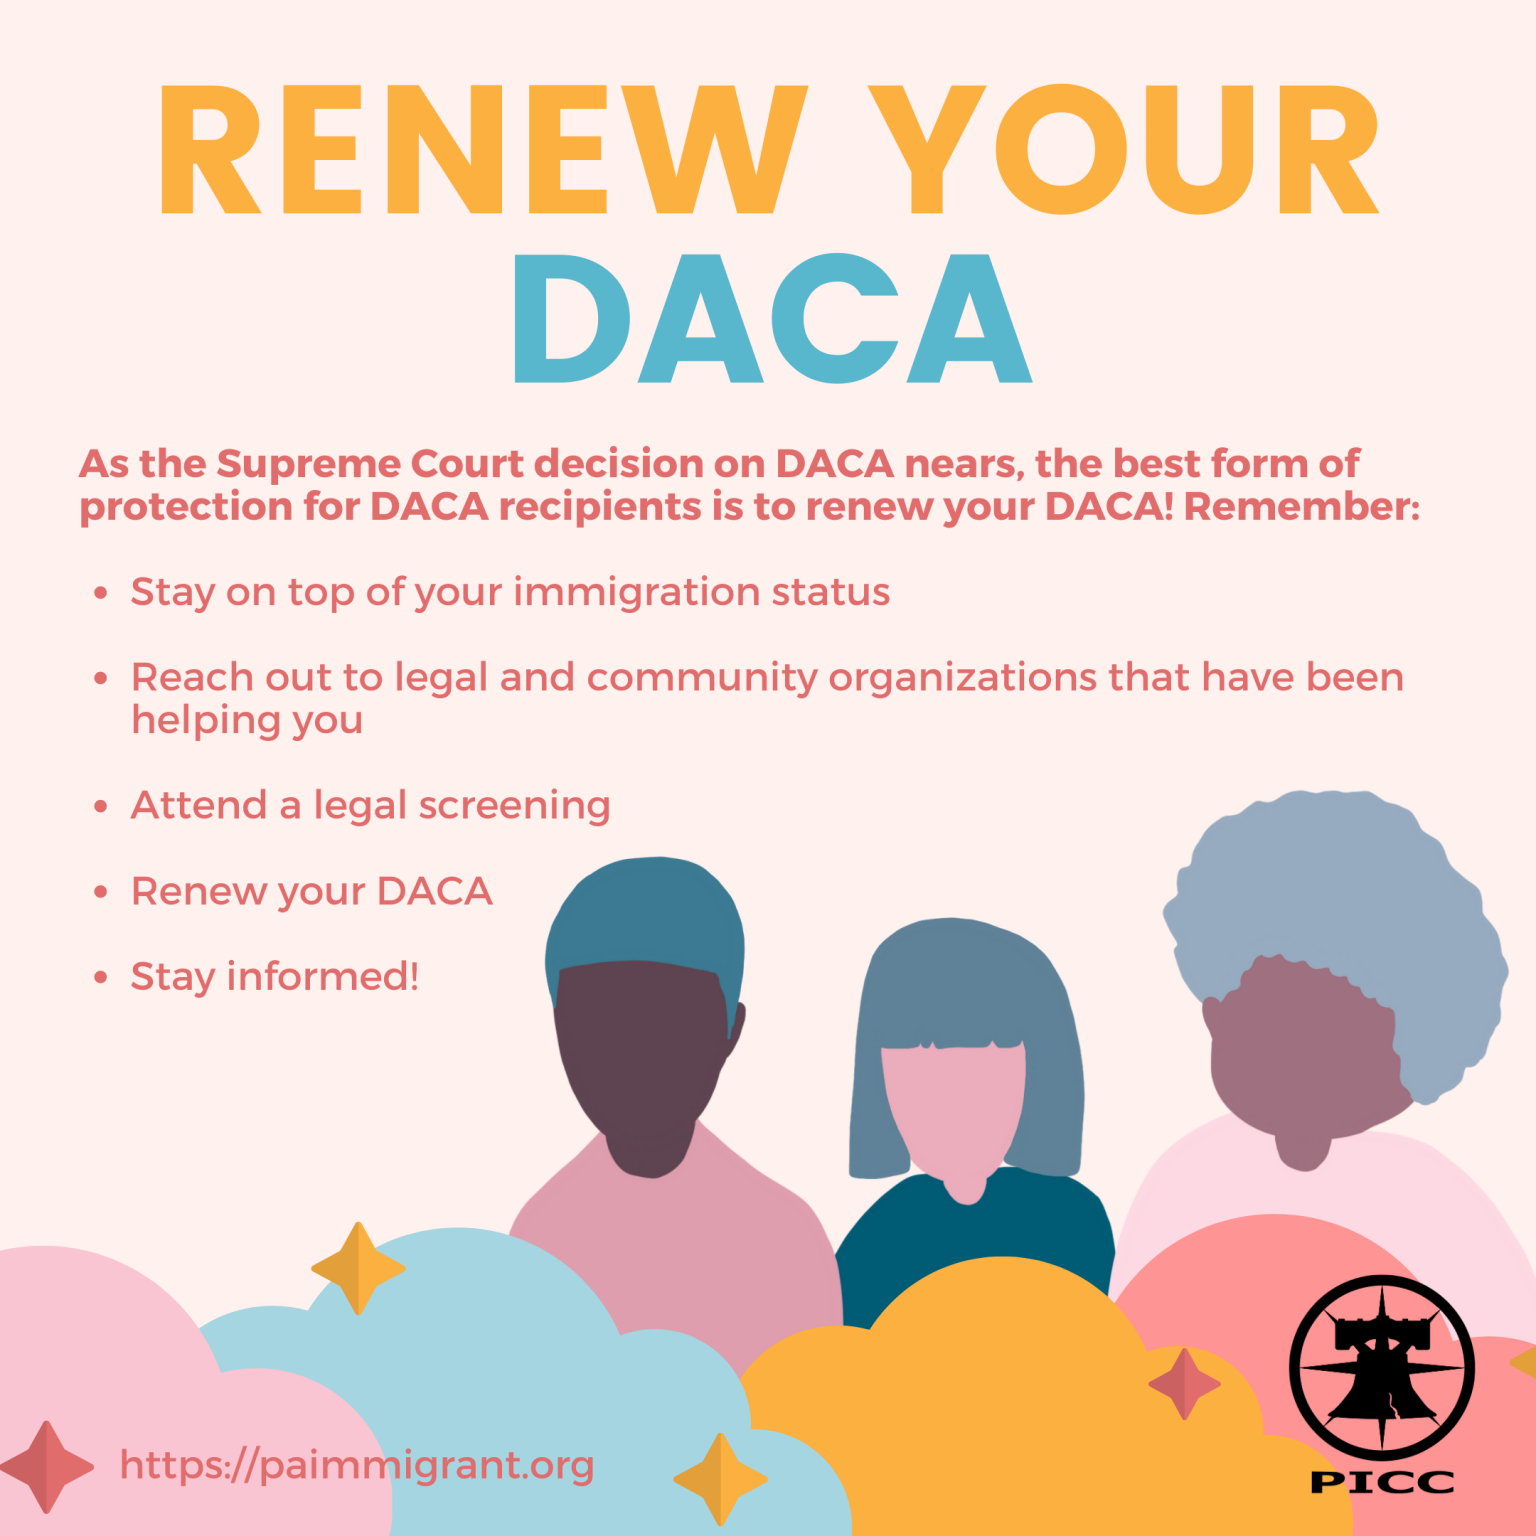 DACA Resources 2020 Pennsylvania Immigration and Citizenship Coalition